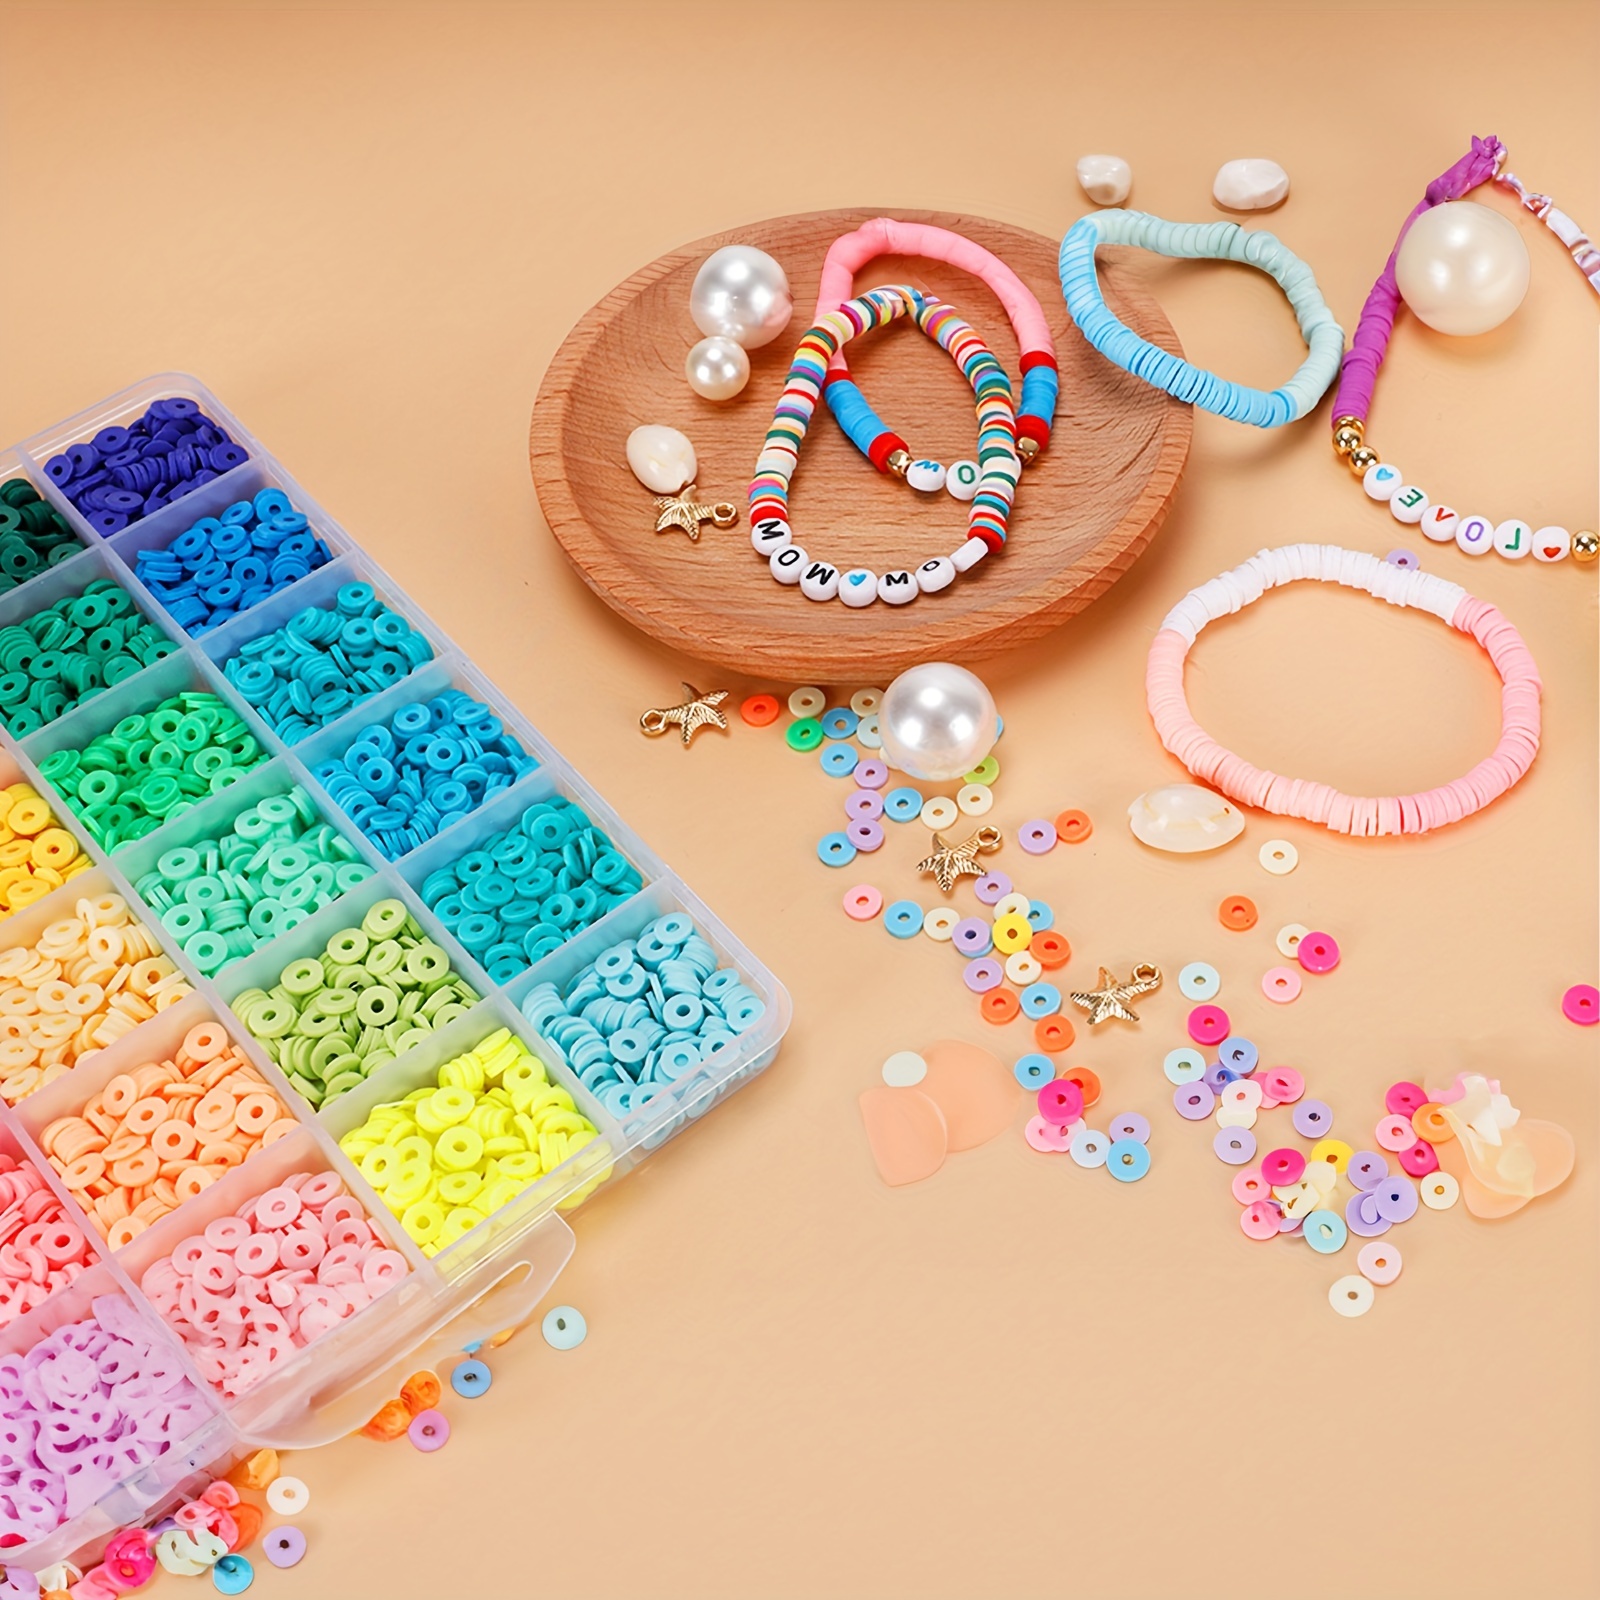 4000pcs Clay Beads for Jewelry Bracelet Making Kit 6mm 24 Colors Flat  Polymer Heishi Beads DIY Craft Kit with Smiley Face Letter Bead Jump Rings Elastic  String Cord Pendant Charms